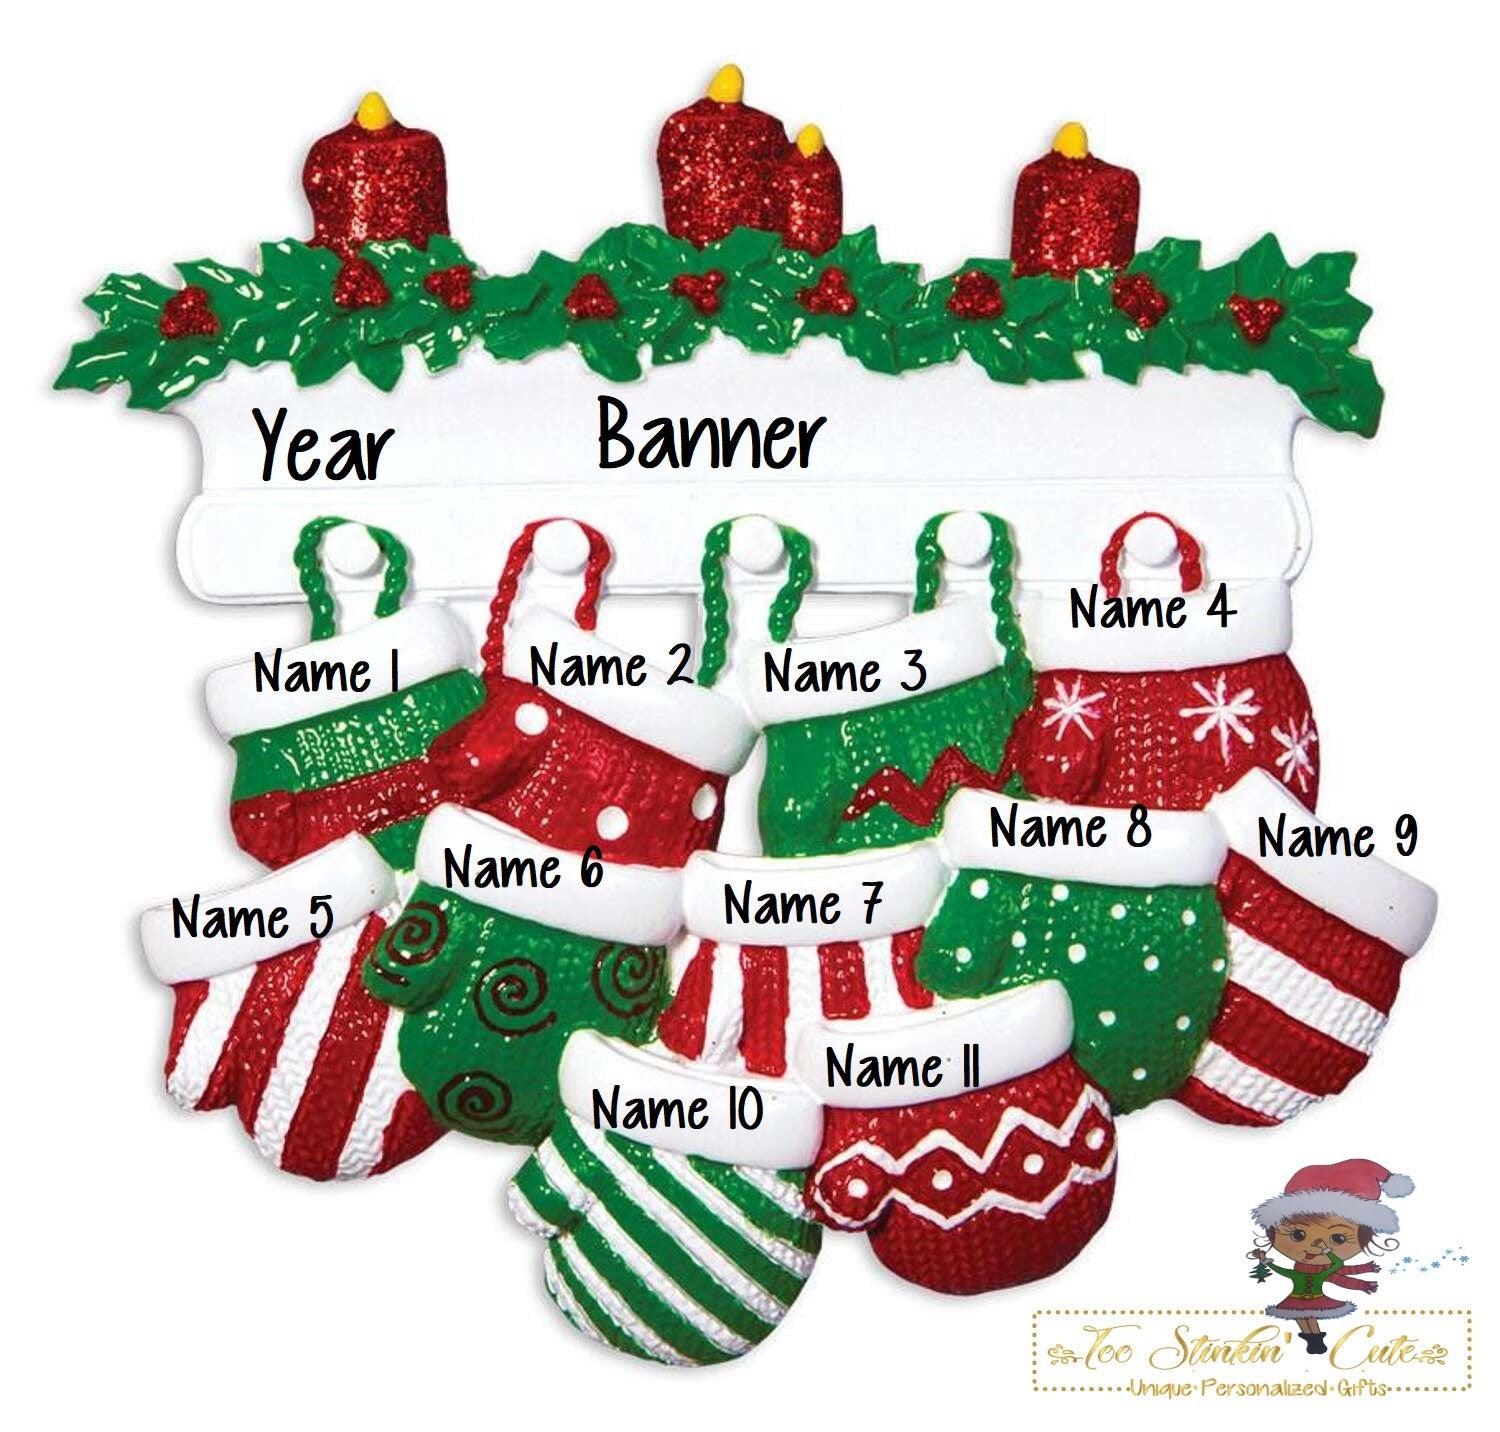 Christmas Ornament Stockings Family of 11/Mittens/ Friends/ Coworkers - Personalized + Free Shipping!